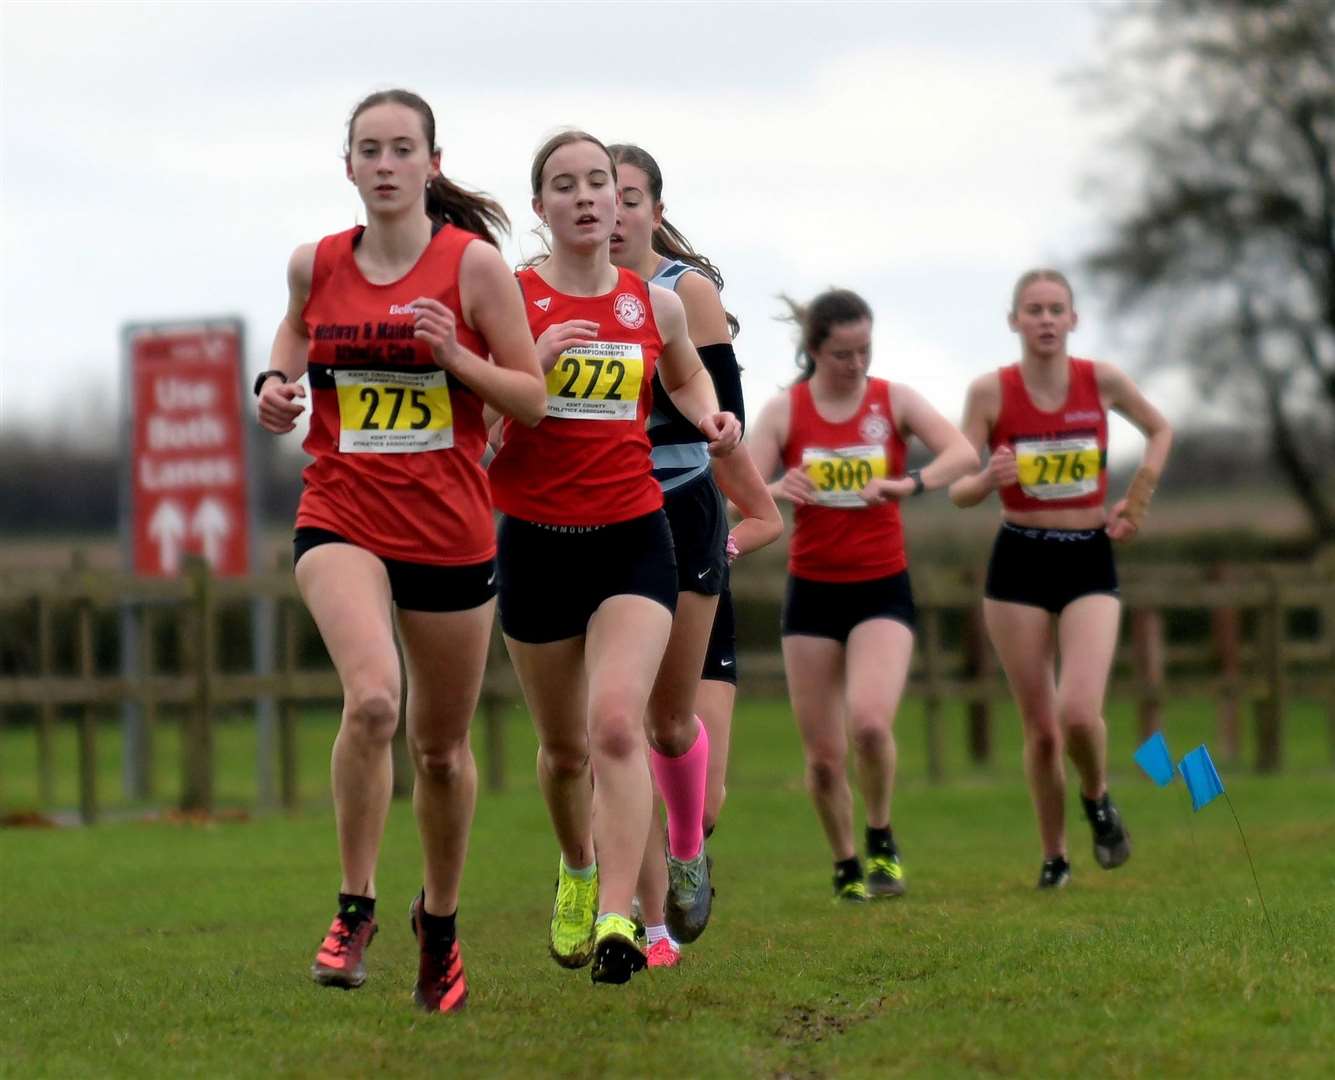 Abigail Hawkes of Medway & Maidstone (No.275) leads Zoe Vallis of Invicta East Kent (No.272) in the under-17 women’s race. Picture: Barry Goodwin